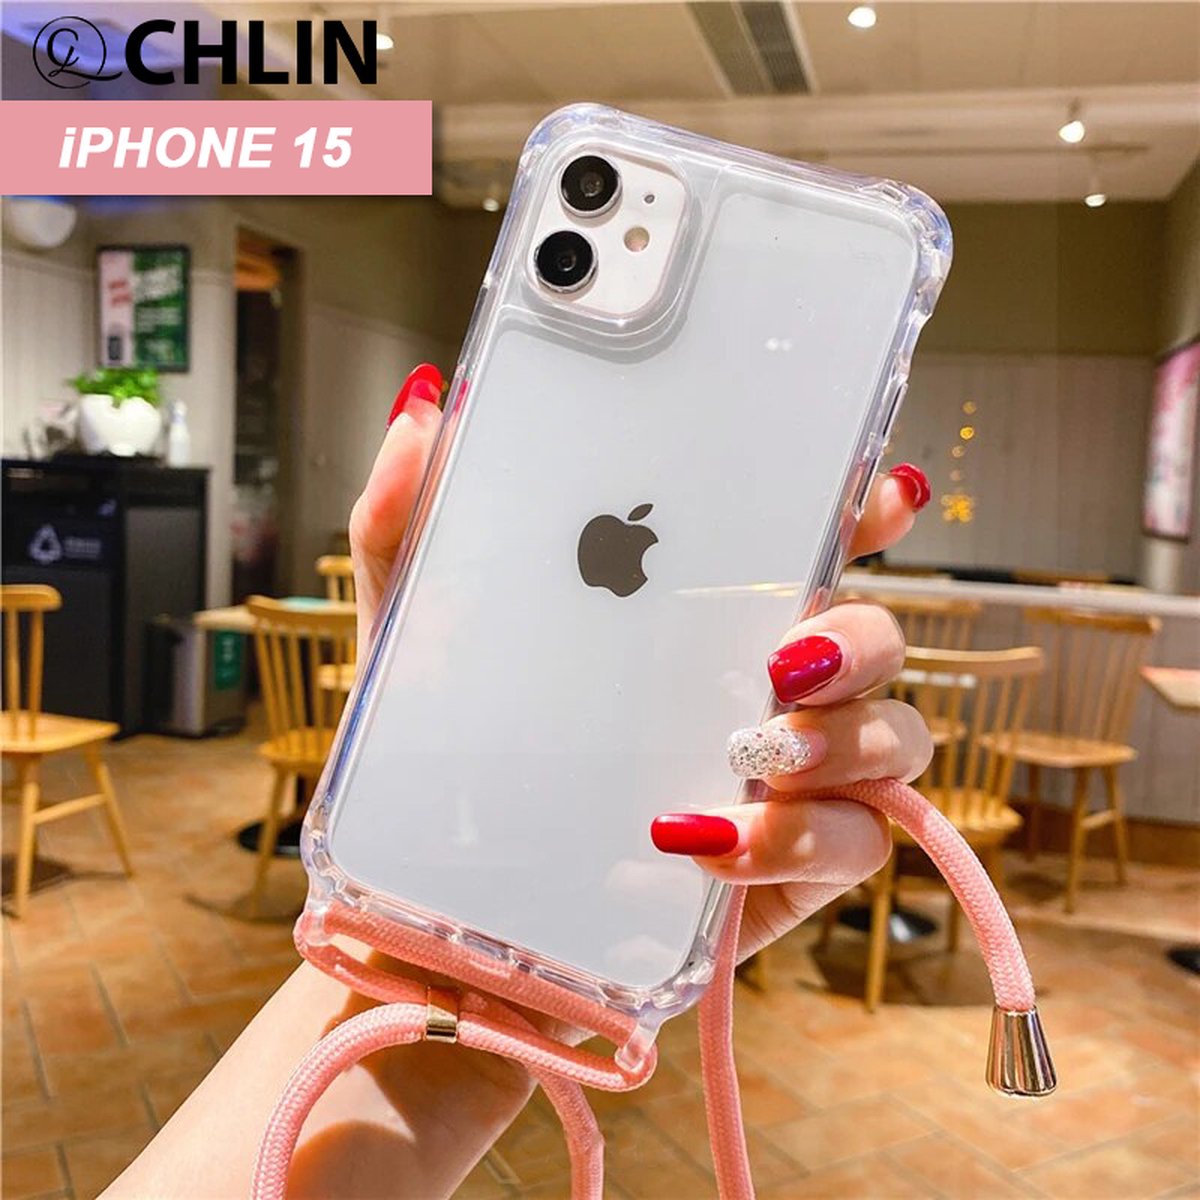 CL CHLIN® - iPhone 15 transparant hoesje met ROZE koord - Hoesje met koord IPhone 15 - iPhone 15 case - iPhone 15 hoes - iphone hoesje met cord - iPhone 15 bescherming - iPhone 15 protector